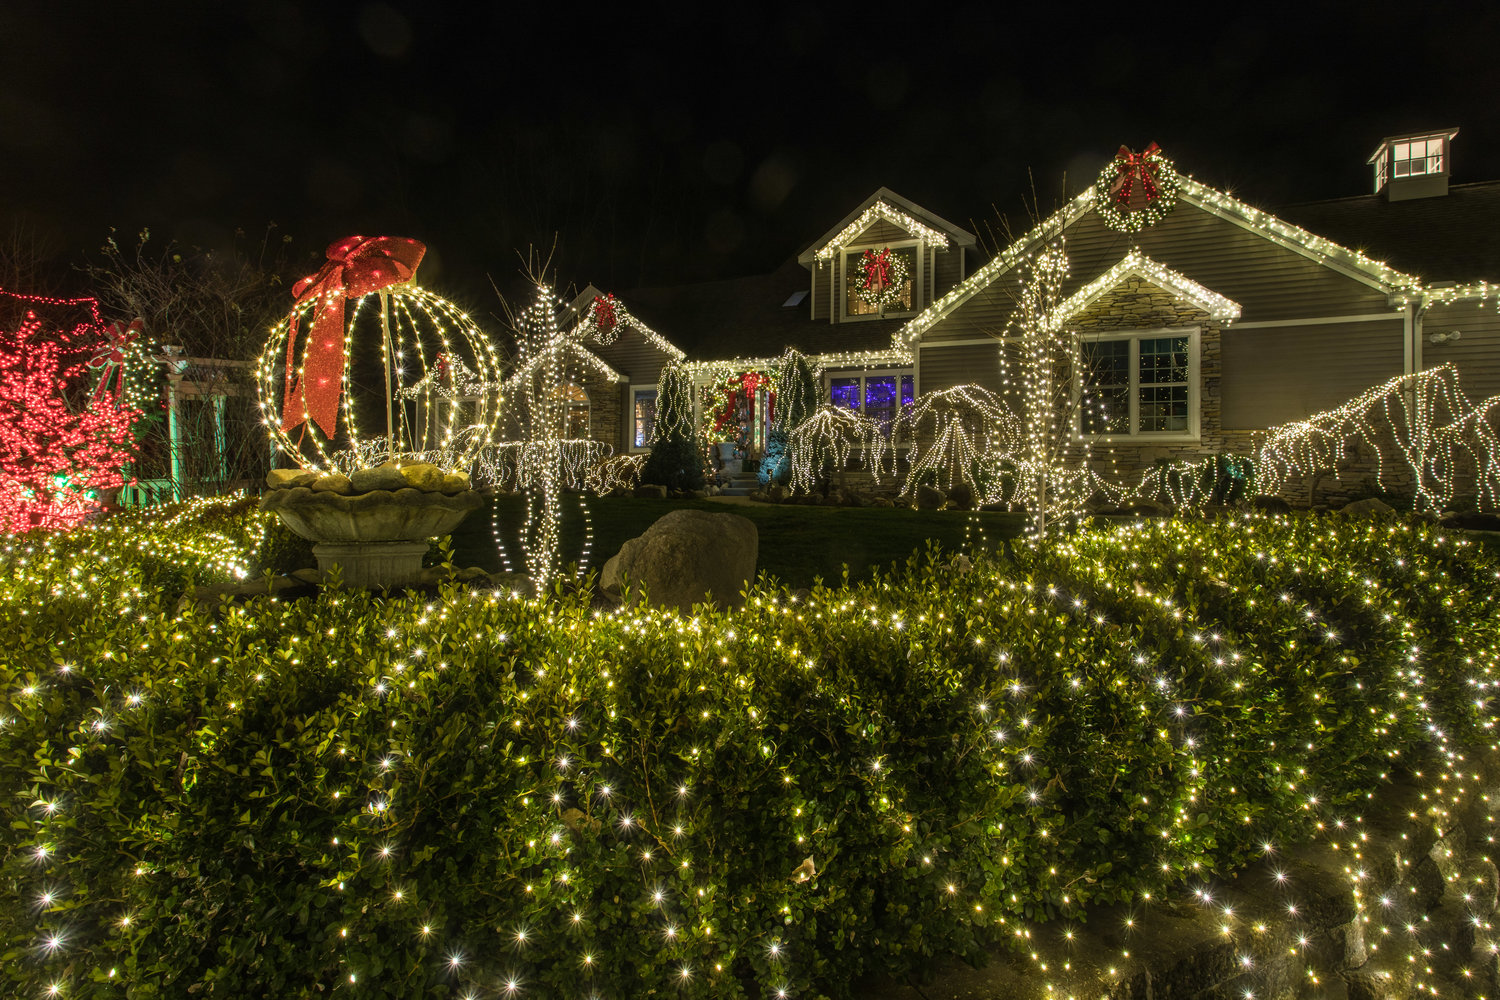 Another view of the display at the Underwood home in Williamstown Township.